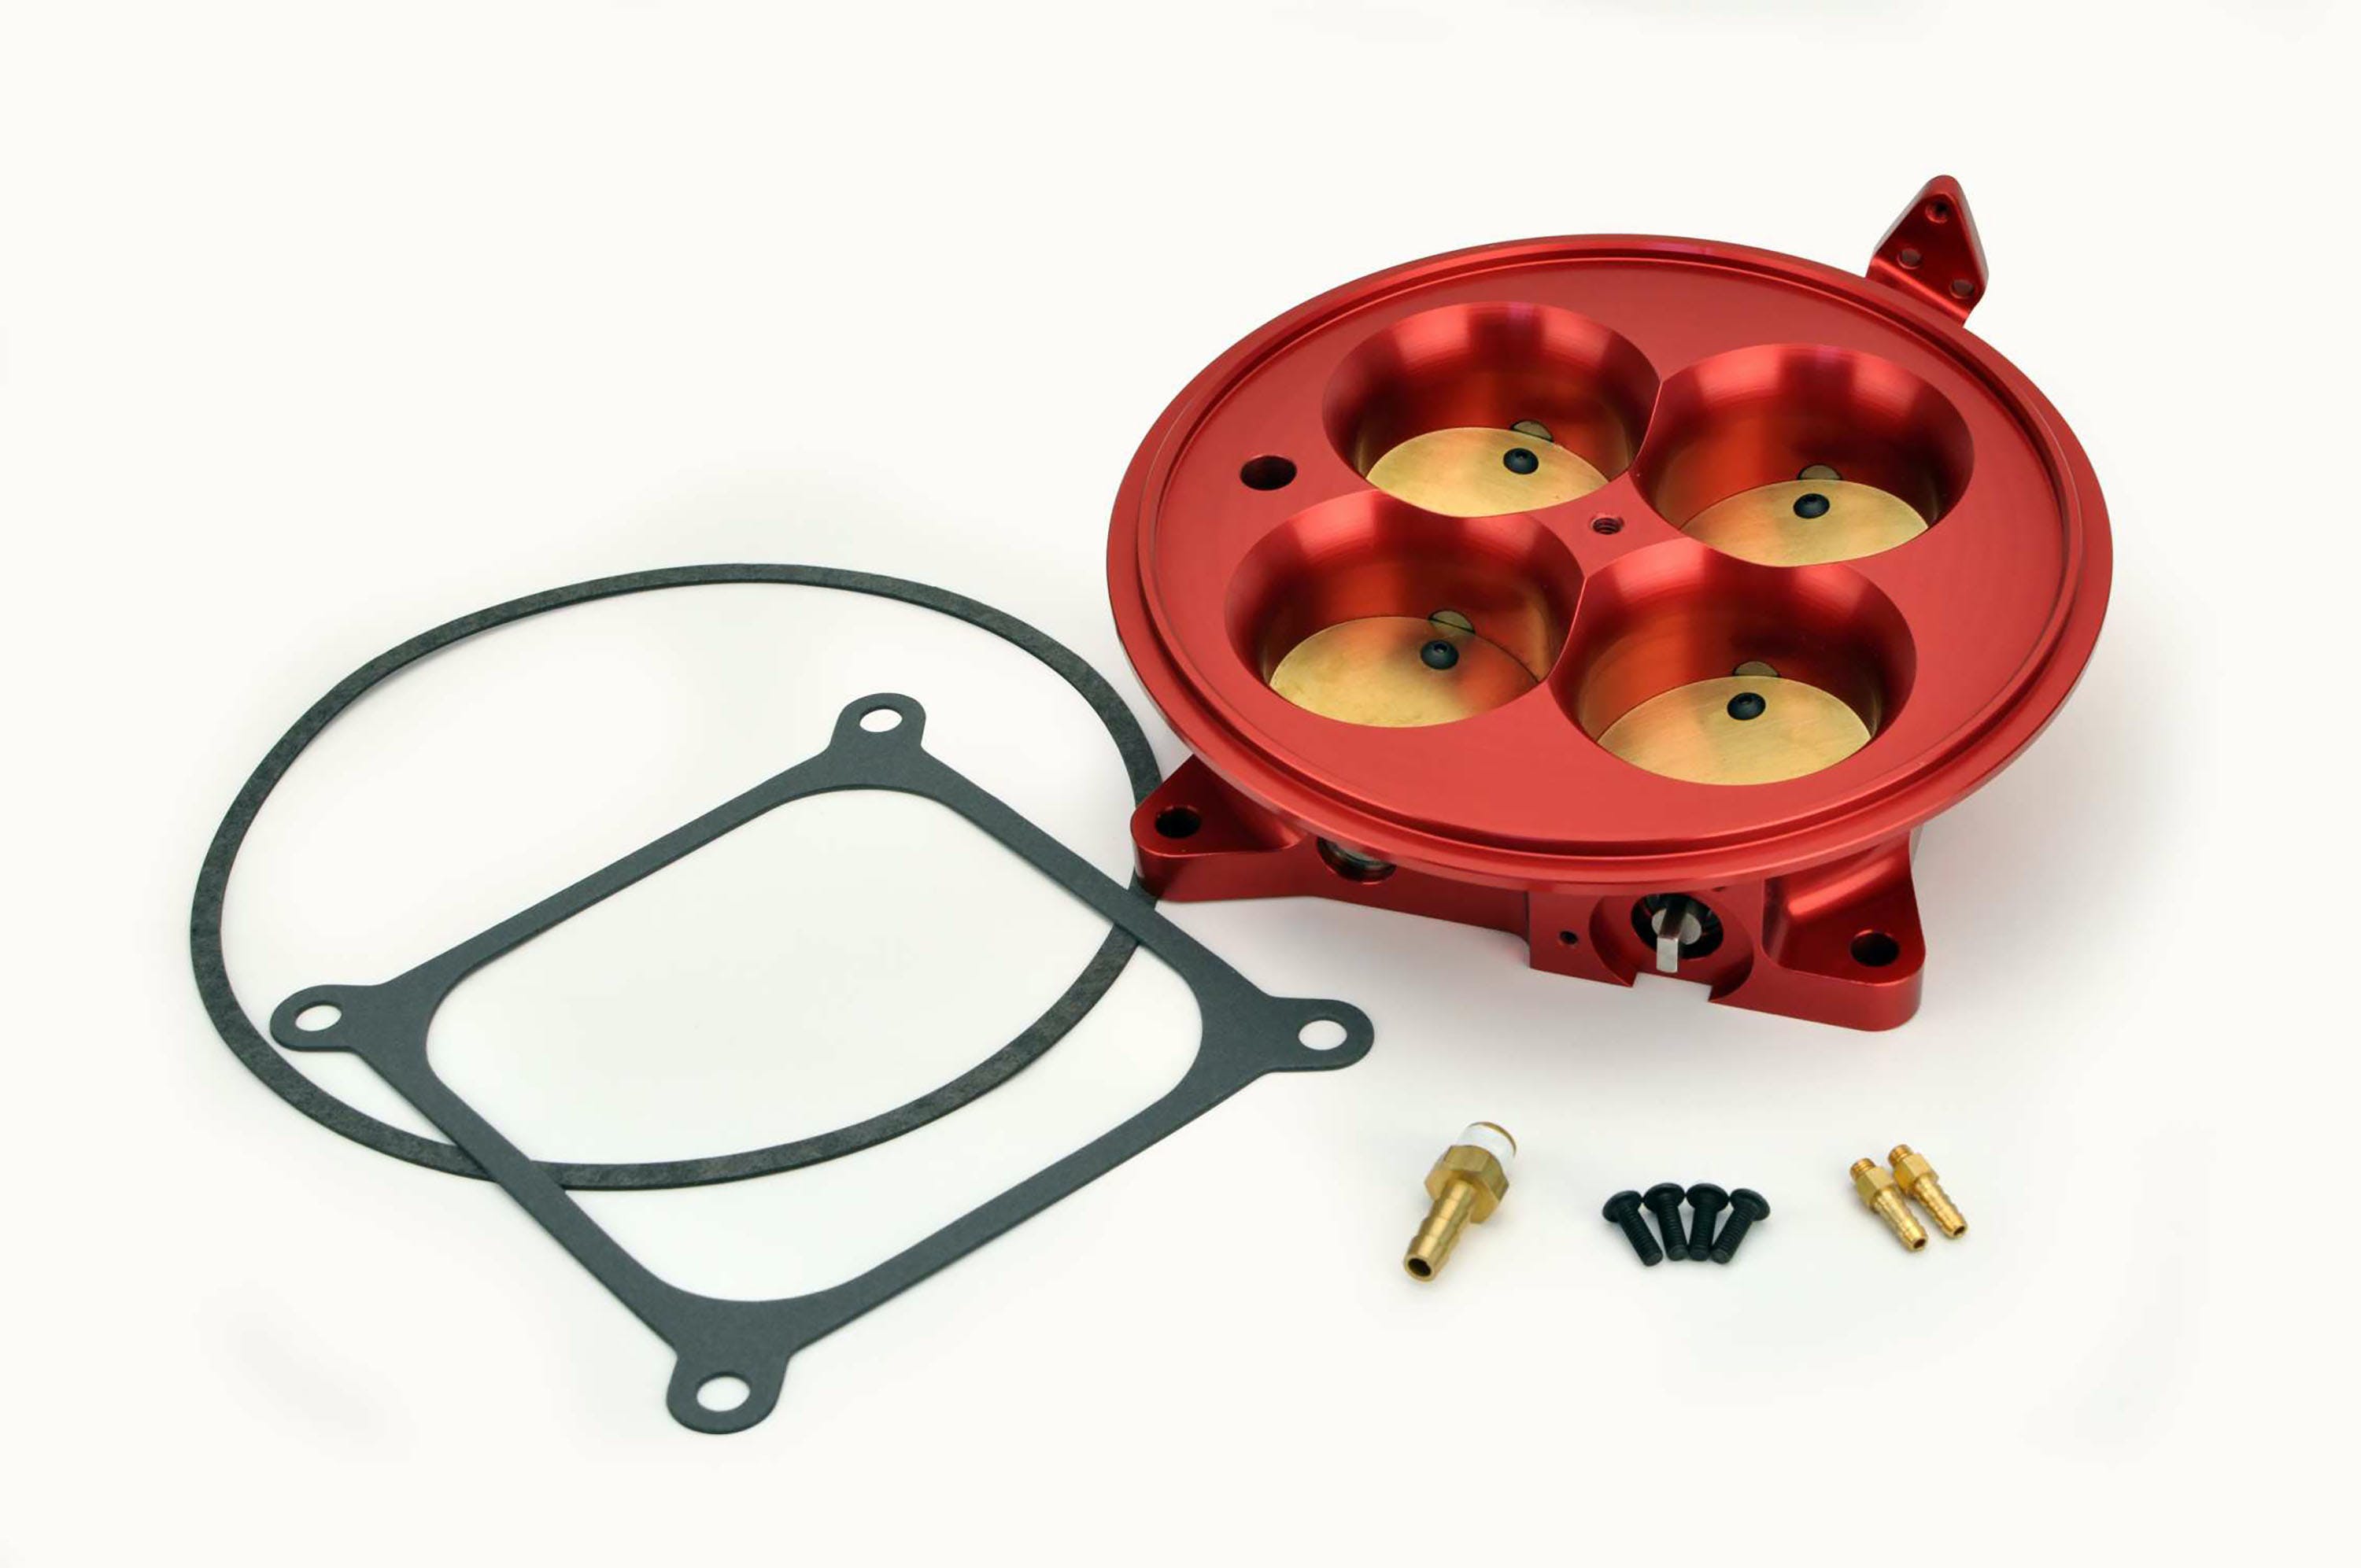 FAST - Fuel Air Spark Technology 307604 Red 4500 Flange Air Only Throttle Body for Multiport Injection EFI Systems